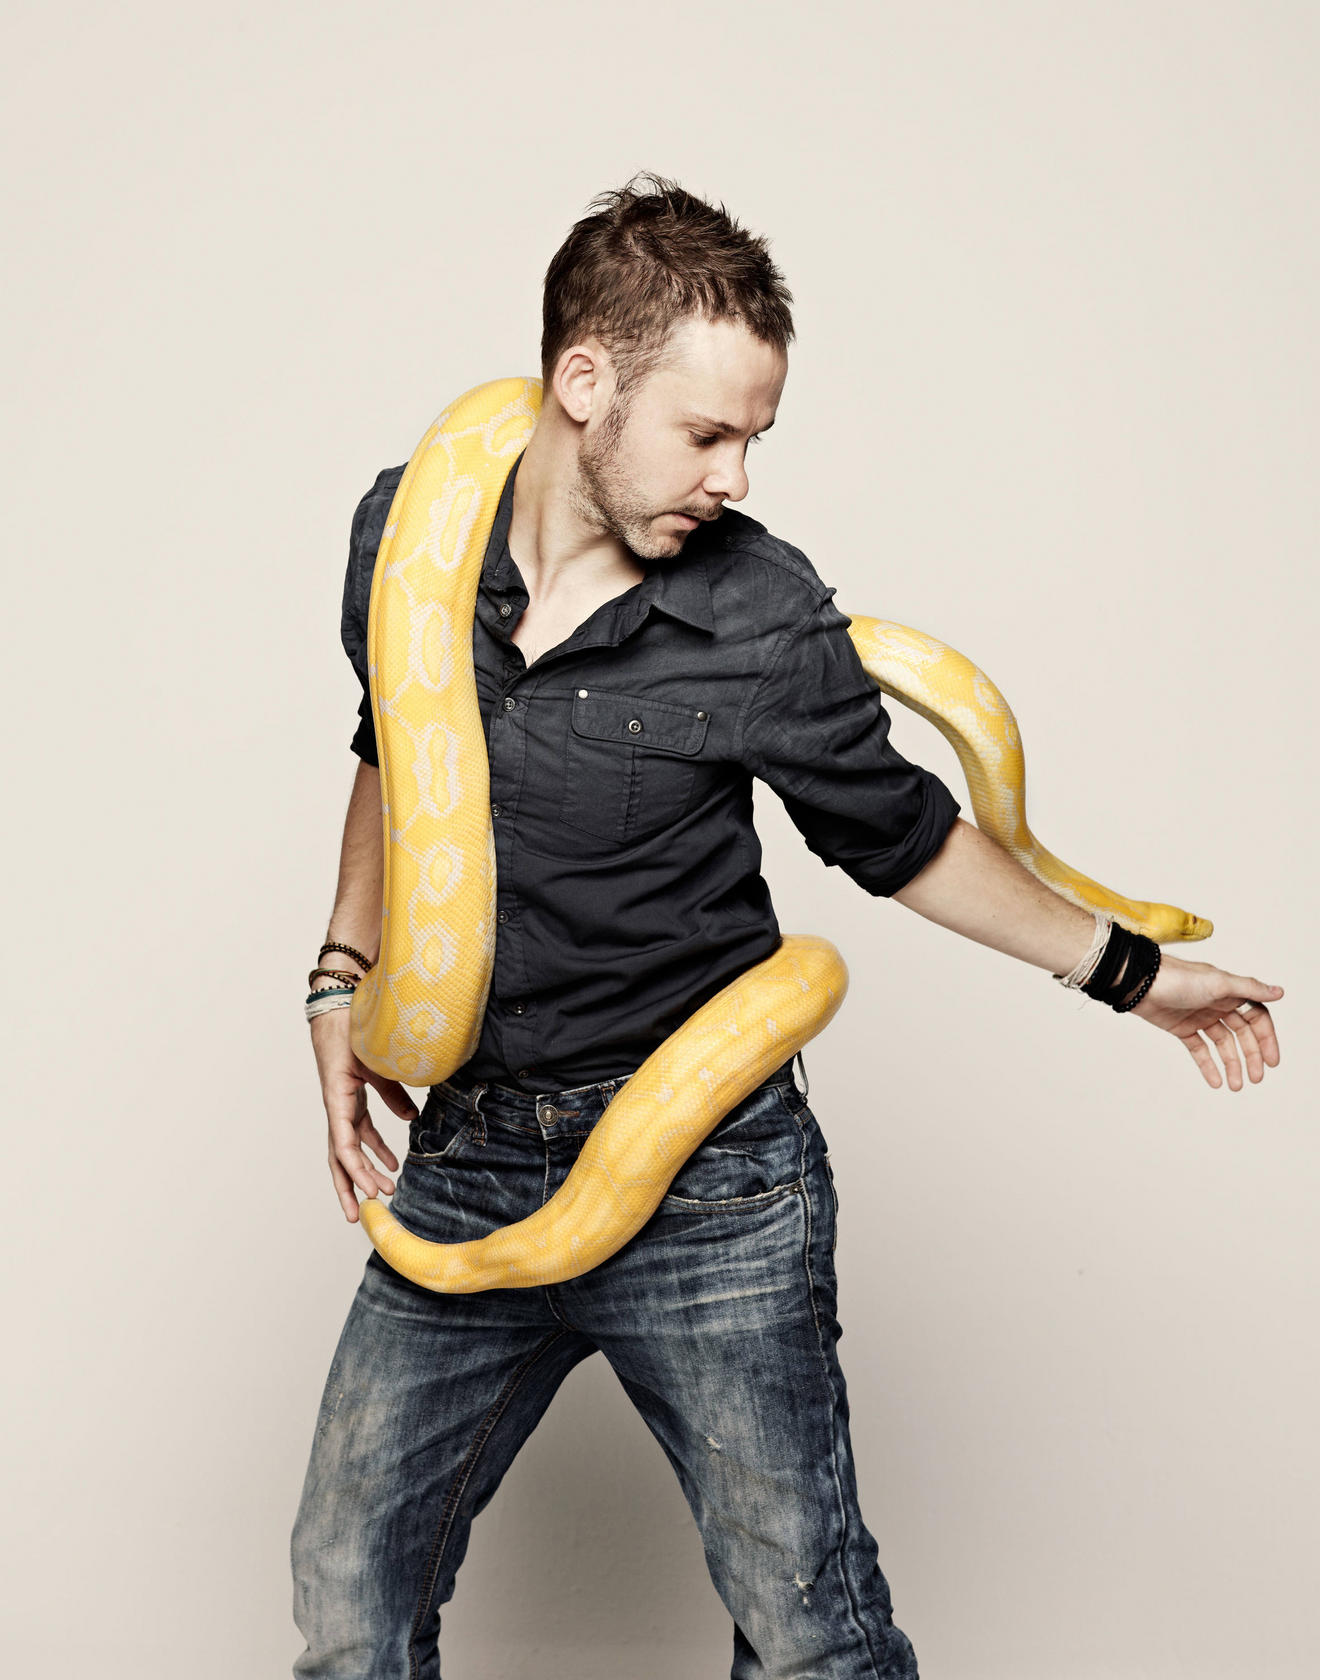 ulv Måske for ikke at nævne Lord of the Rings star Dominic Monaghan follows his wild dreams in his  nature TV show Wild Things - YP | South China Morning Post